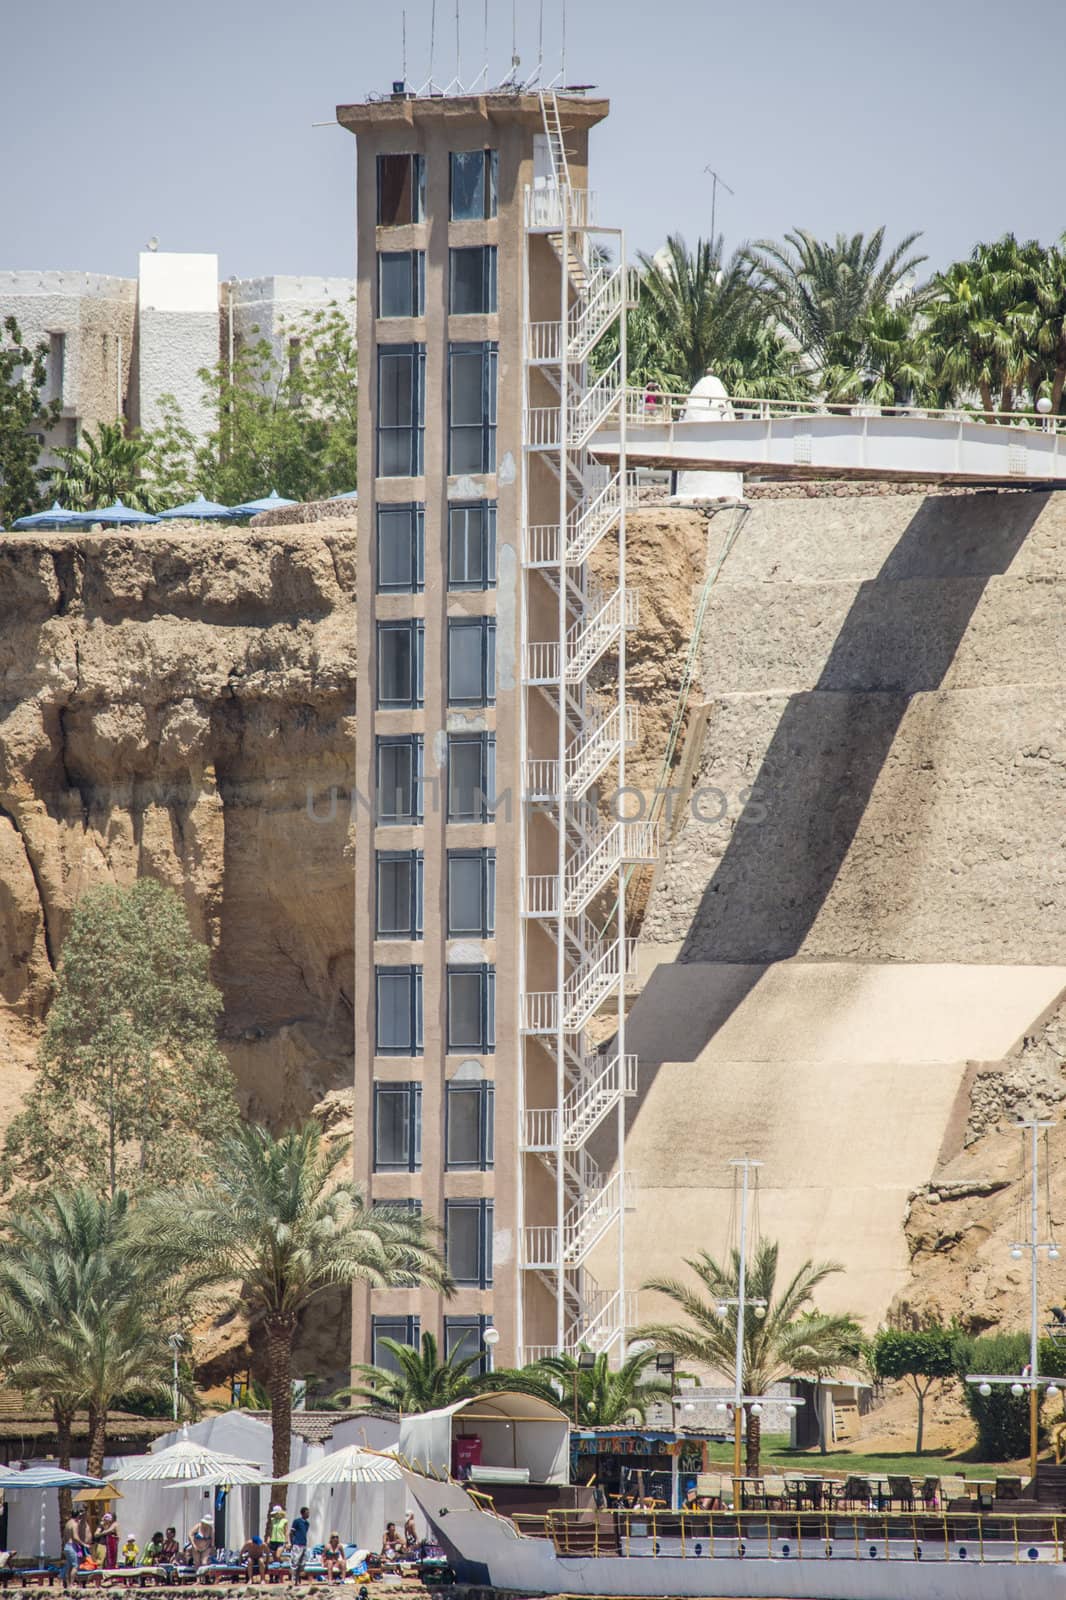 At a hotel in Sharm el Sheikh, Egypt has it built an elevator tower that runs from the cliffs and down to the beach. The picture is shot one day in April 2013.